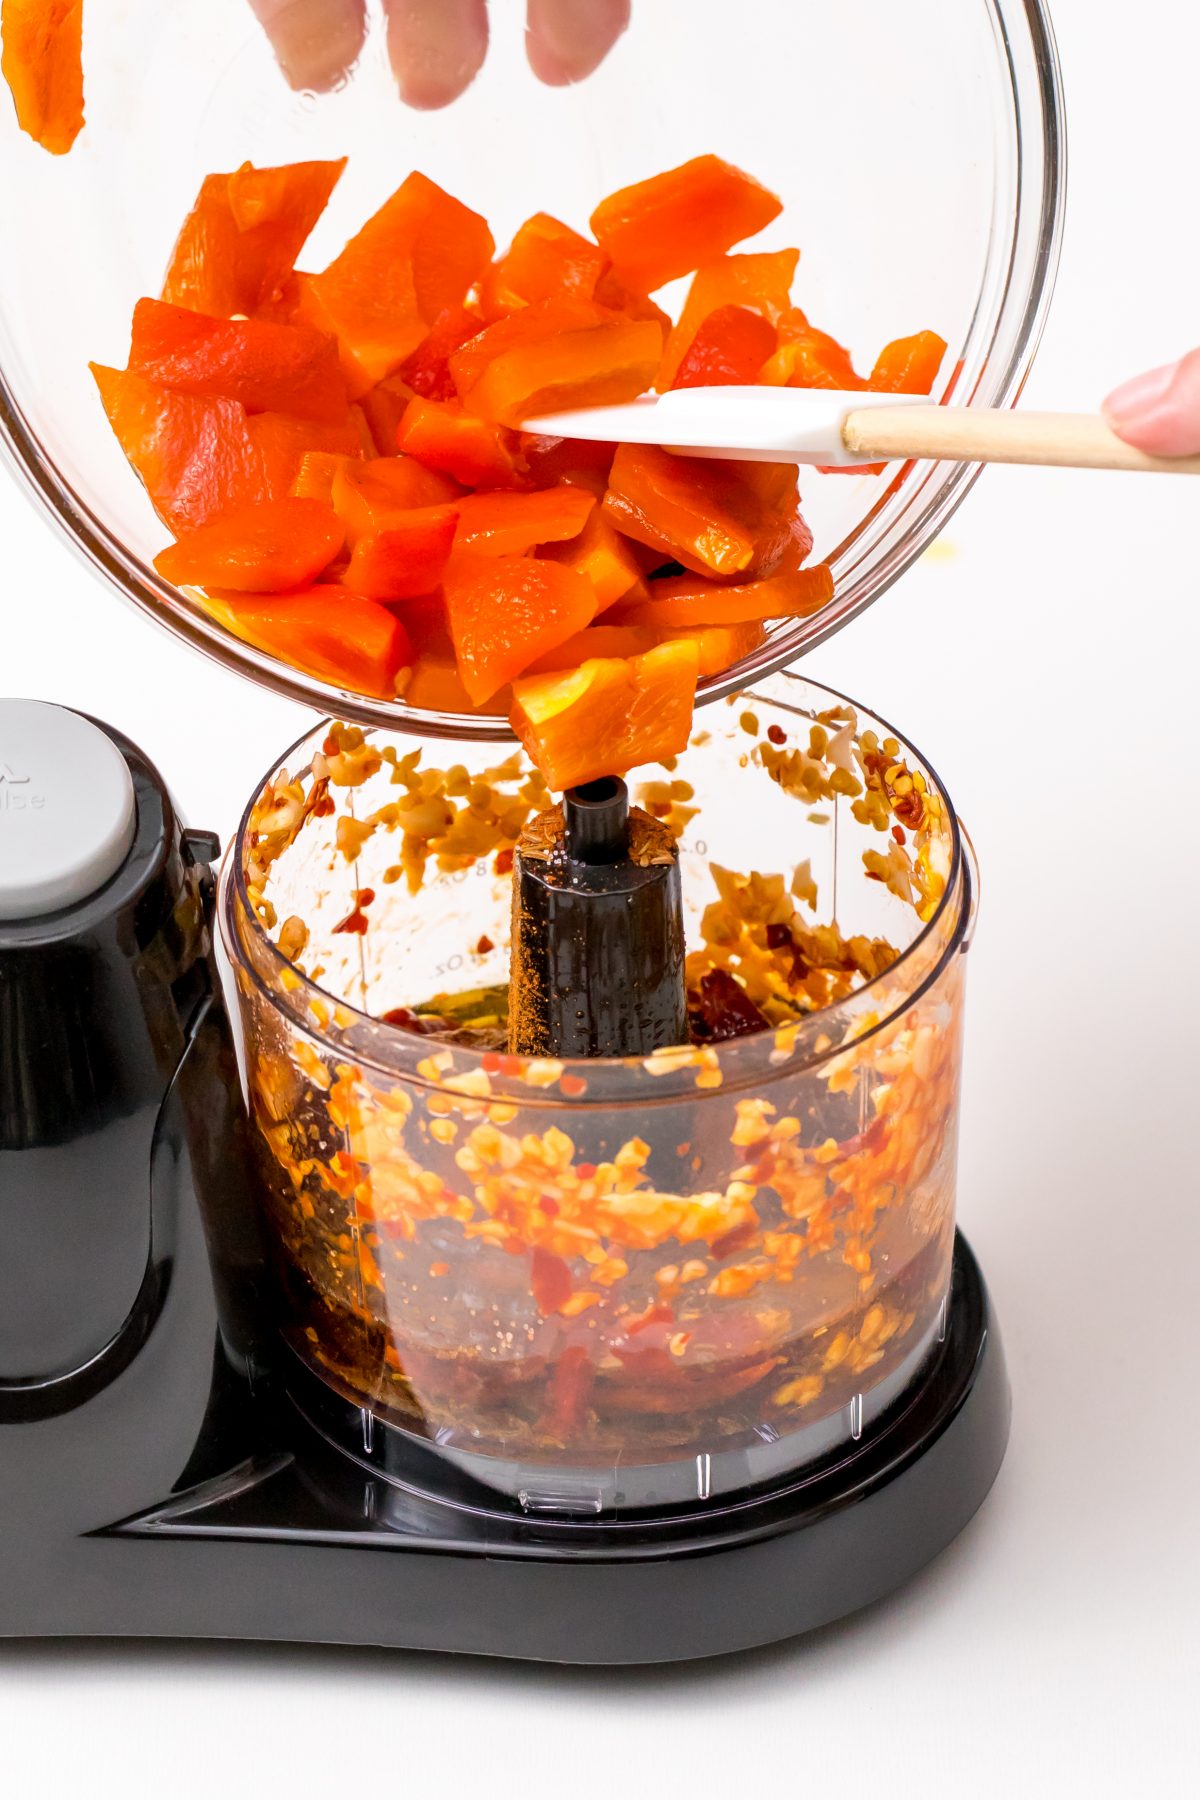 Place all ingredients in food processor or blender for Harissa paste and harissa butter